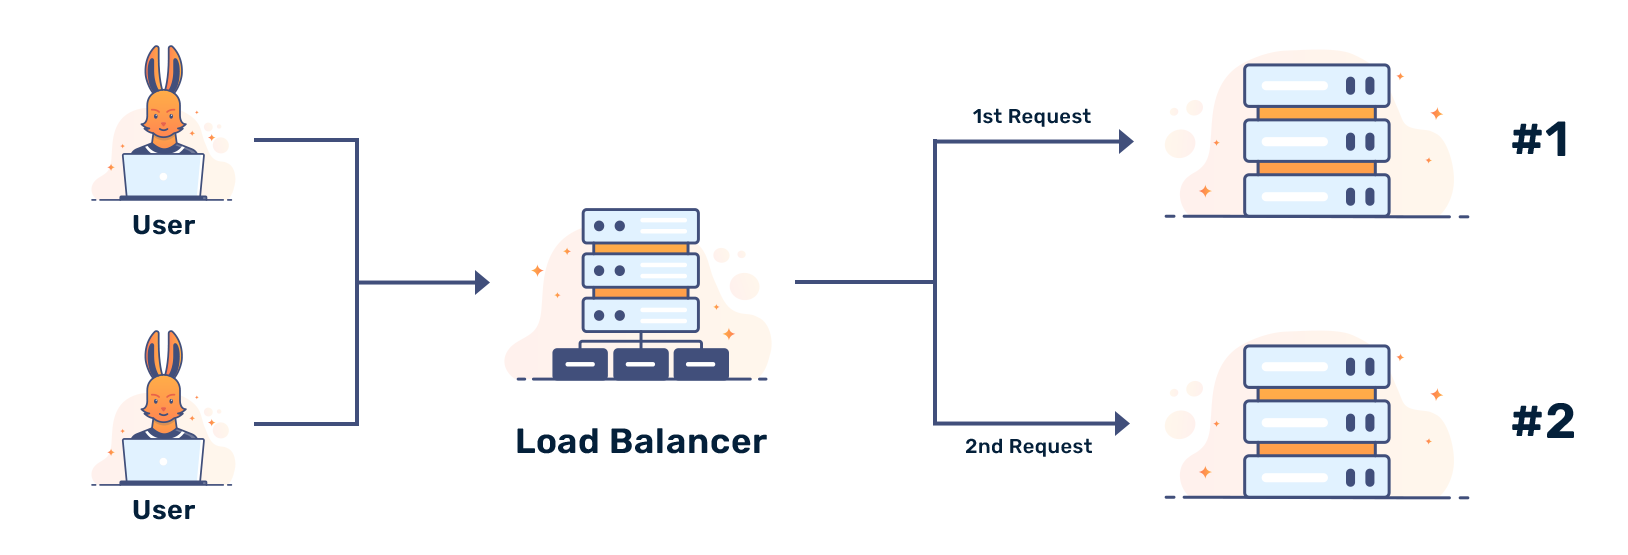 What is a load balancer and how does it work